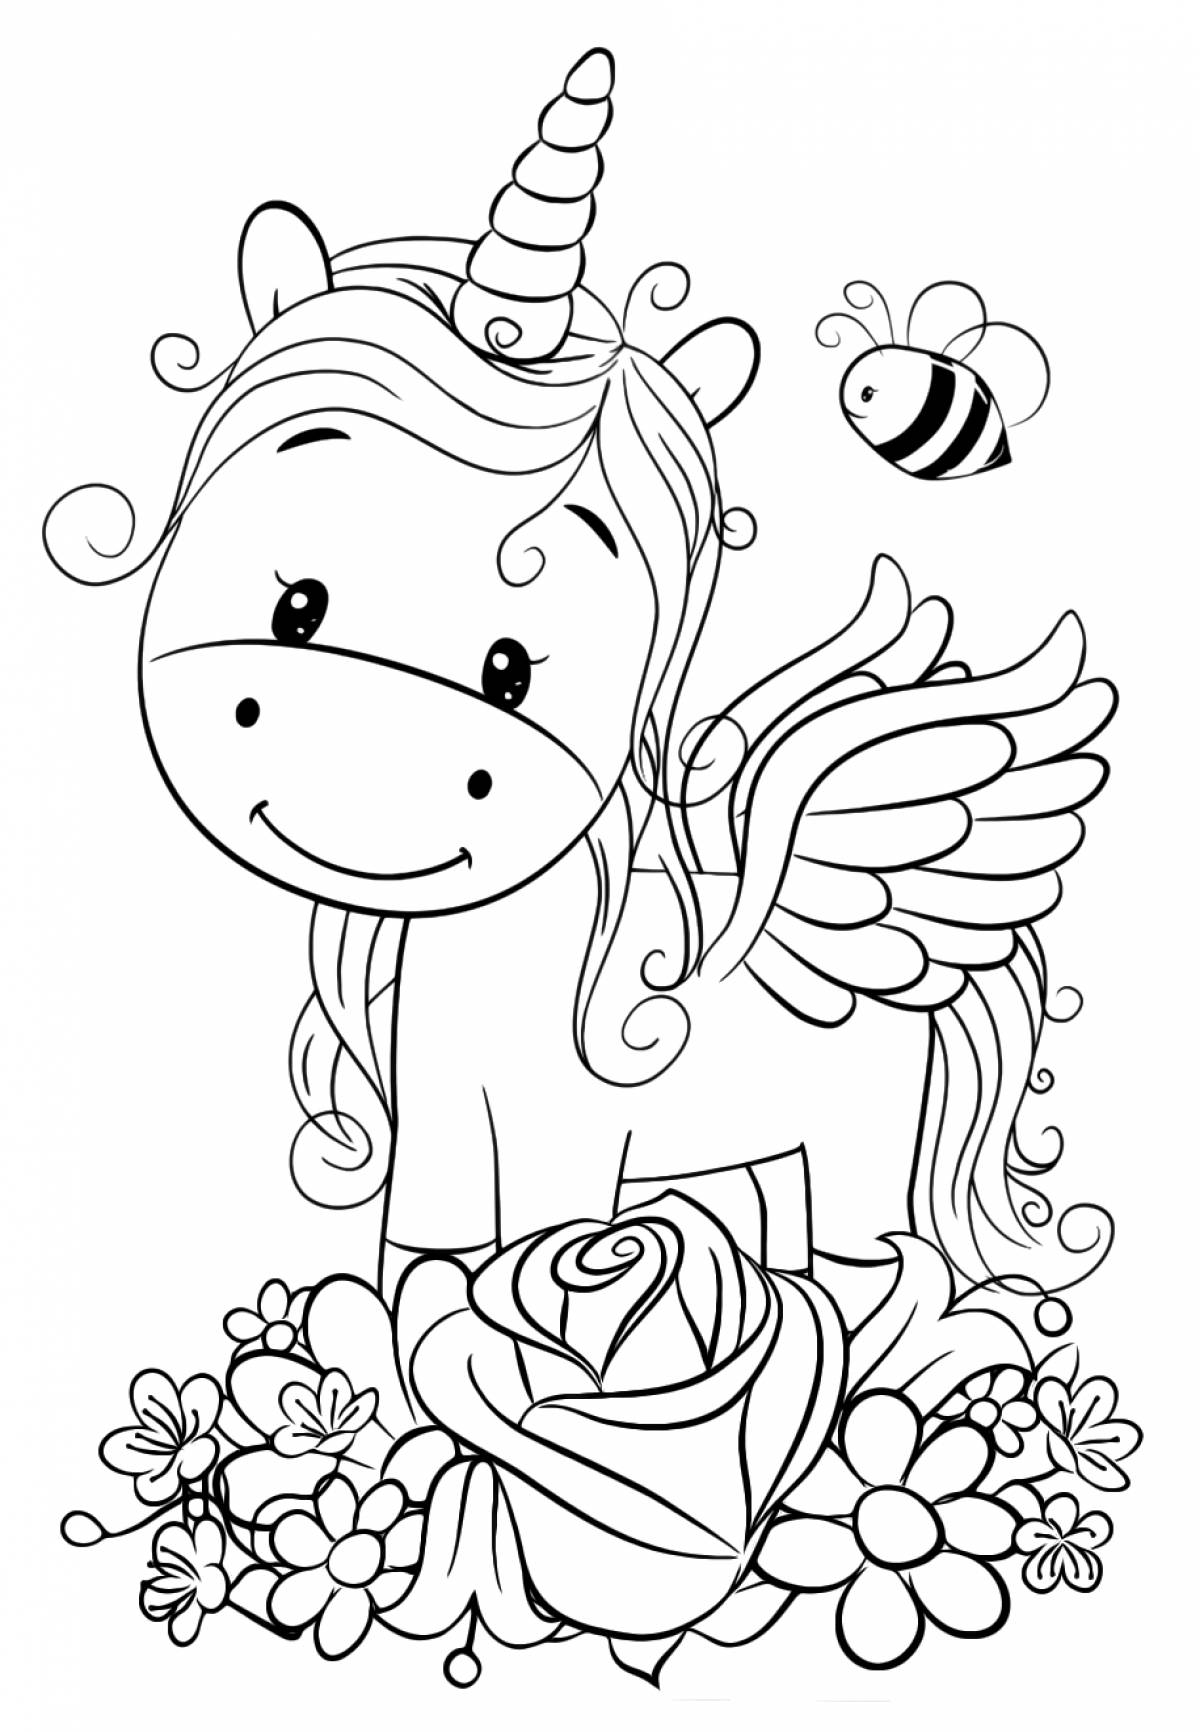 Sparkling coloring book for girls cute unicorn